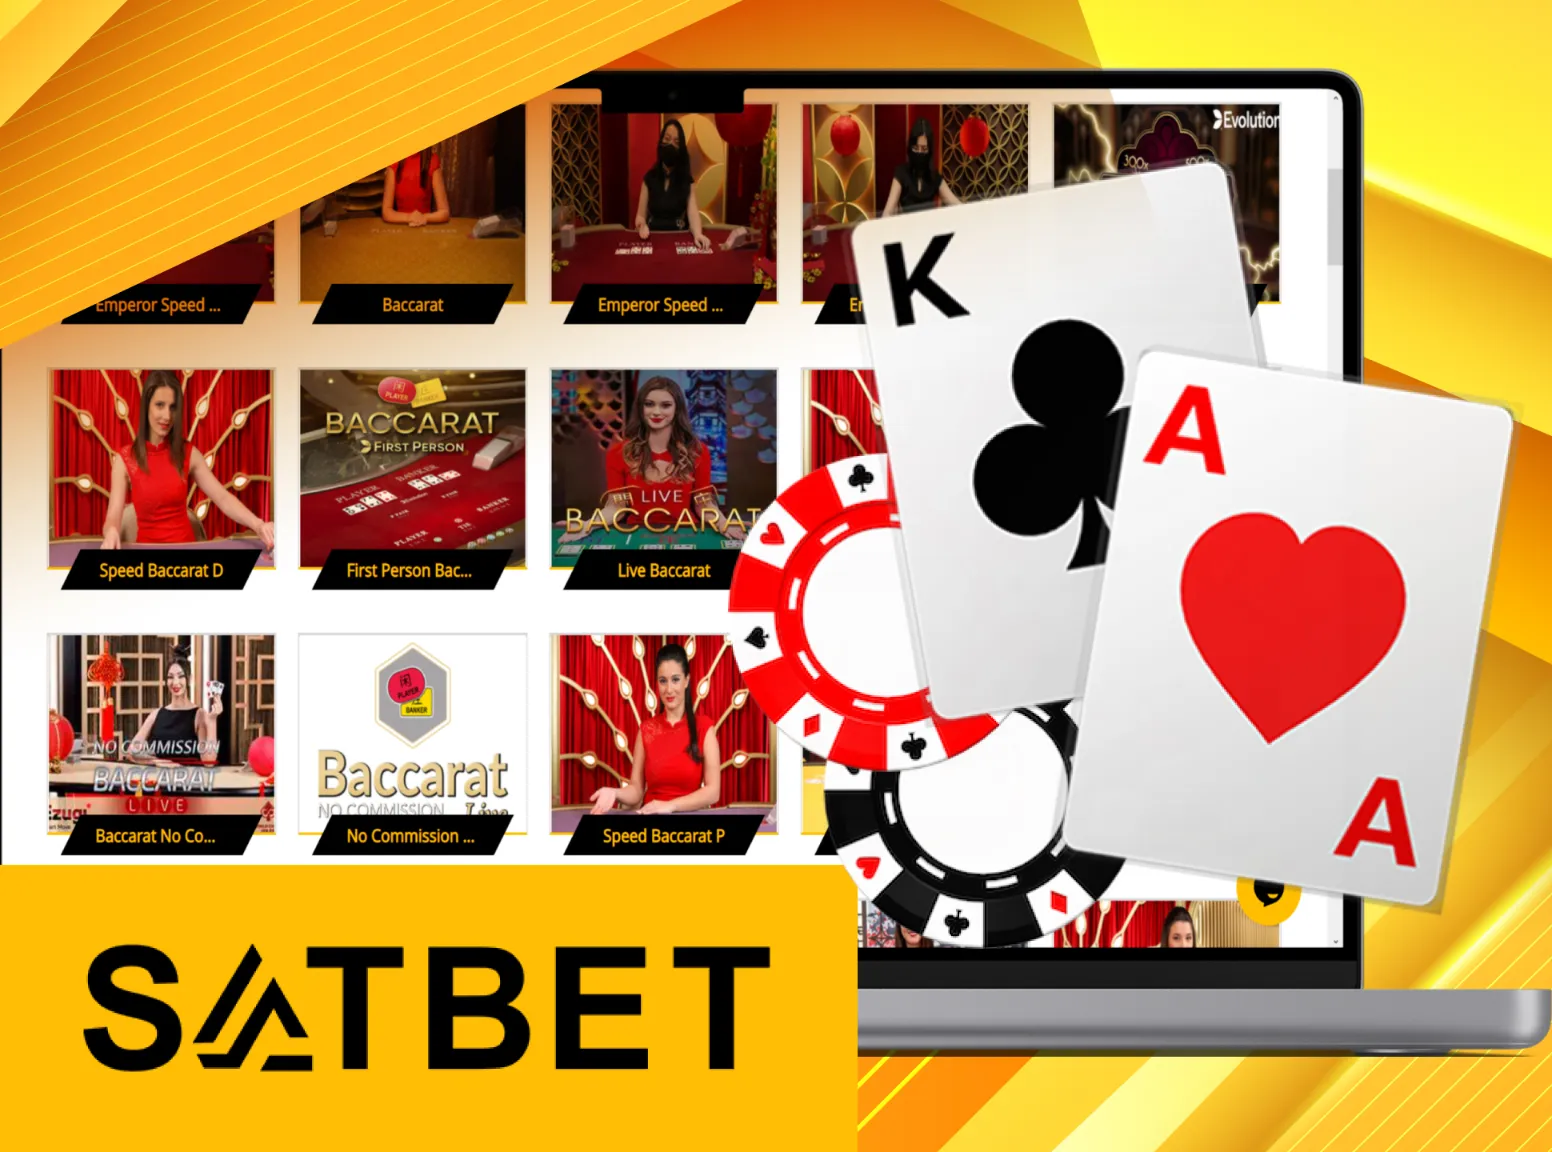 Plat most famous table game in India at Satbet.